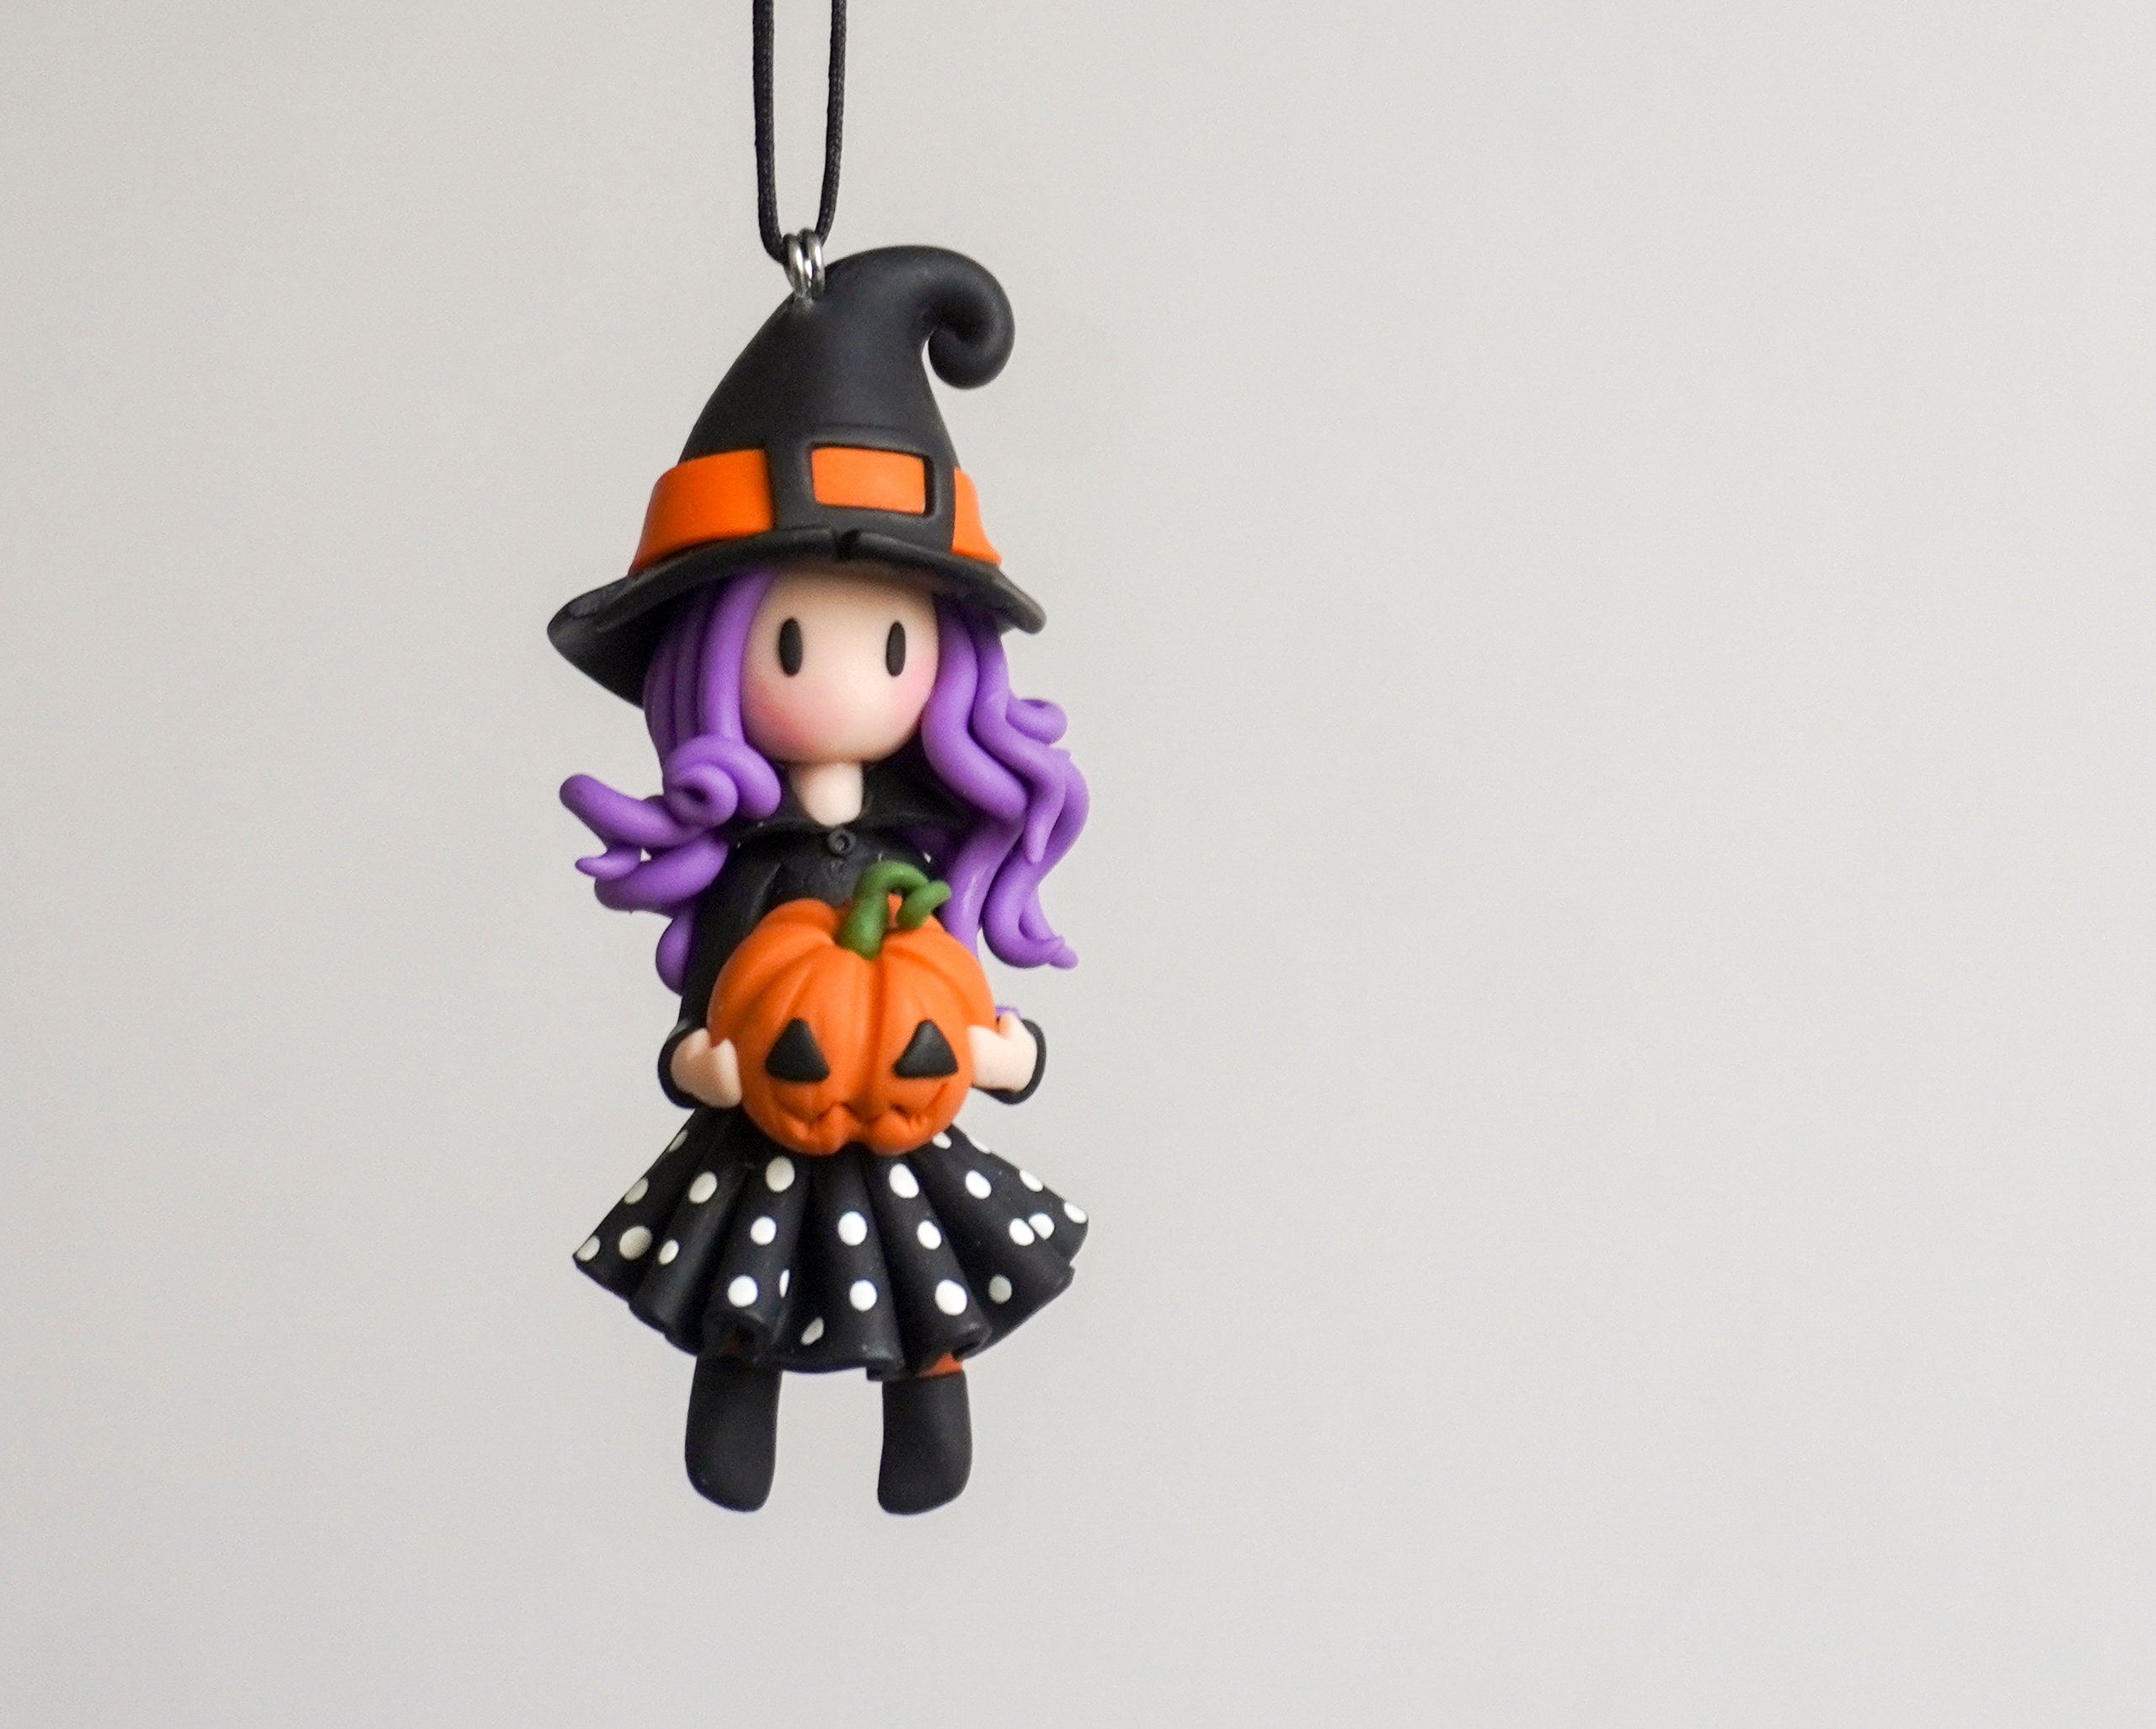 Kawaii Witch Girl Charm | Fairy Tale Jewellery Making | Halloween Party Supplies (10 Pcs / Gold / 10mm x 15mm)